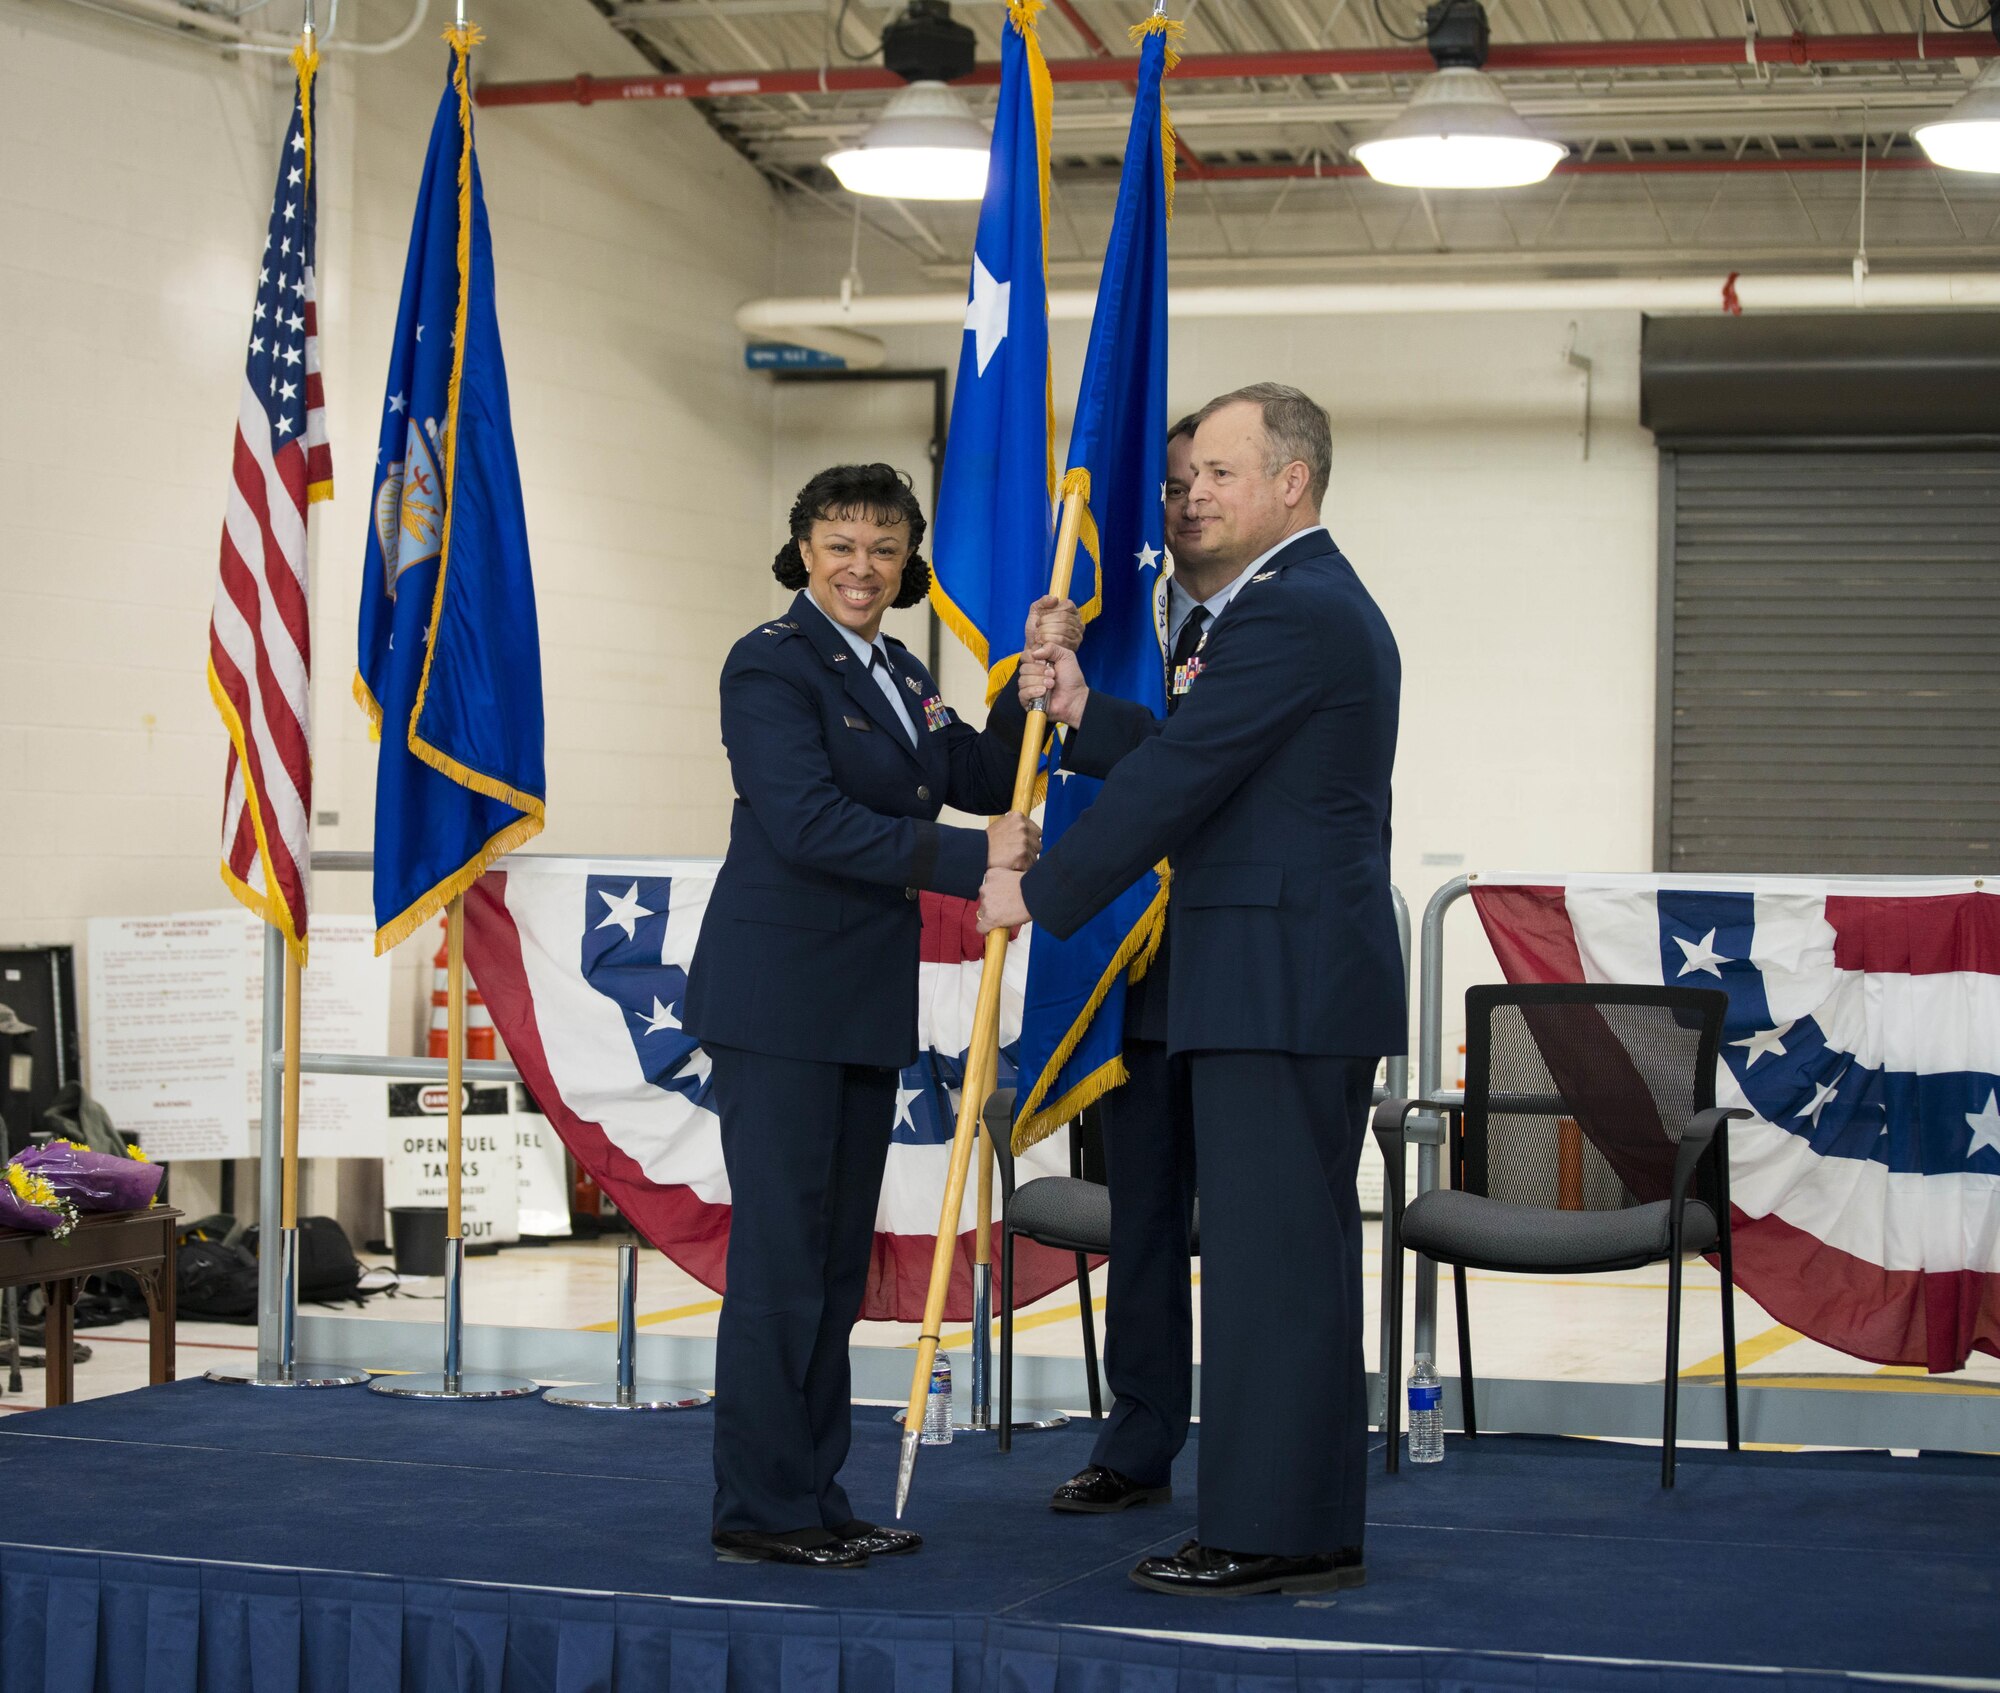 Maj. Gen. Stayce D. Harris, 22nd Air Force commander, Dobbins Air Reserve Base, Georgia,  passes the 914th Airlift Wing flag to Col. Brian S. Bowman as he assumes command of the wing at Niagara Falls Air Reserve Station, N.Y., Feb. 6. (U.S. Air Force photo by Tech. Sgt. Stephanie Sawyer) 
